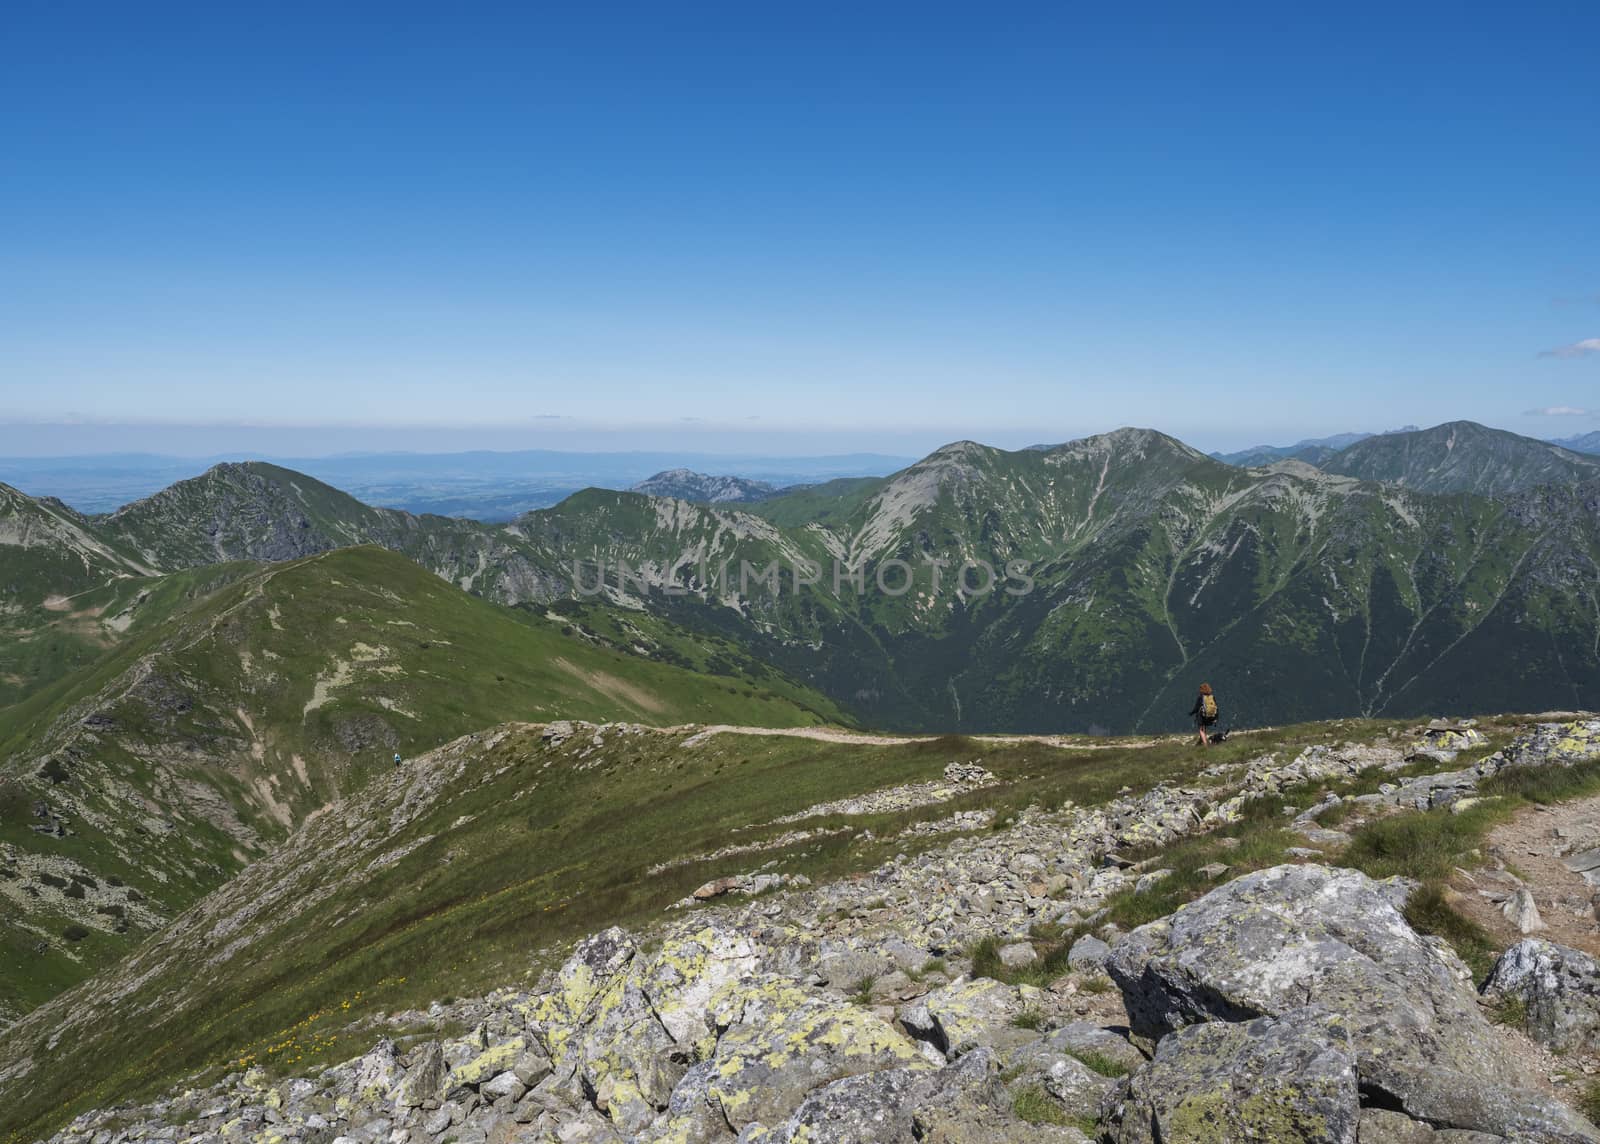 Mountain landscape of Western Tatra mountains with woman with bacpack and dog on hiking trail on Baranec. Sharp green grassy rocky mountain peaks with scrub pine and alpine flower meadow. Summer blue sky background.